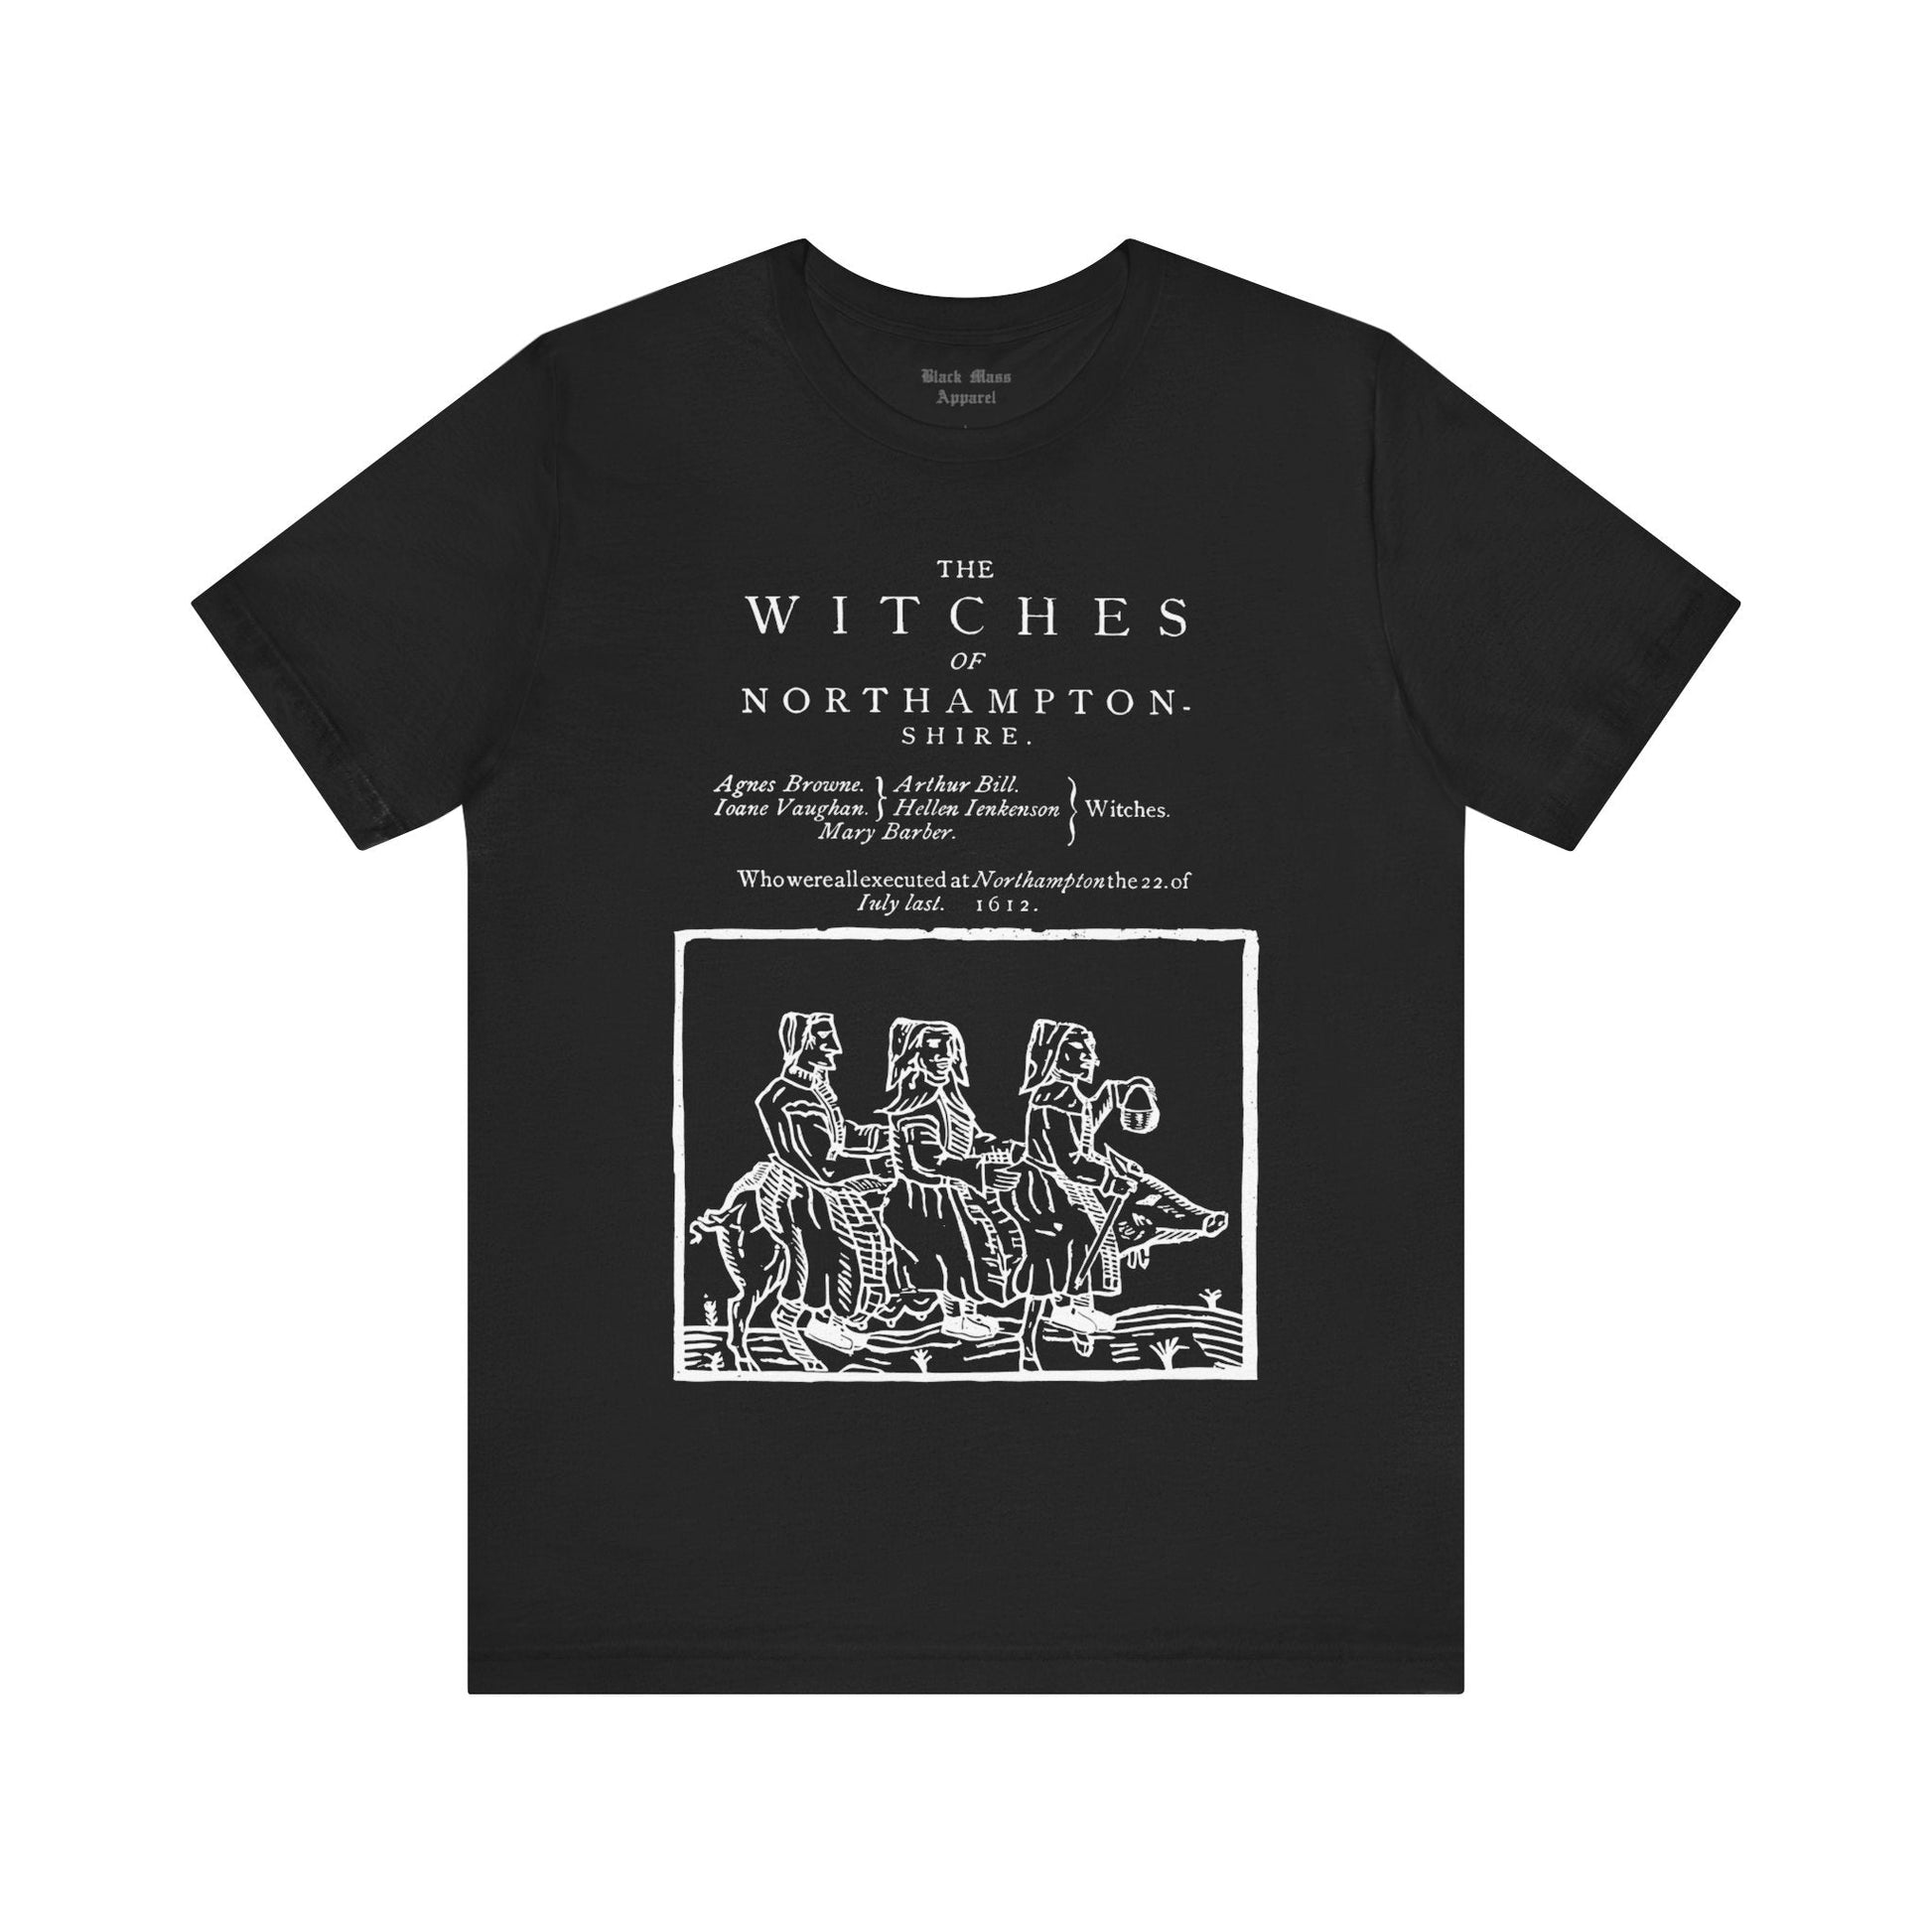 The Witches of Northamptonshire - Black Mass Apparel - T-Shirt